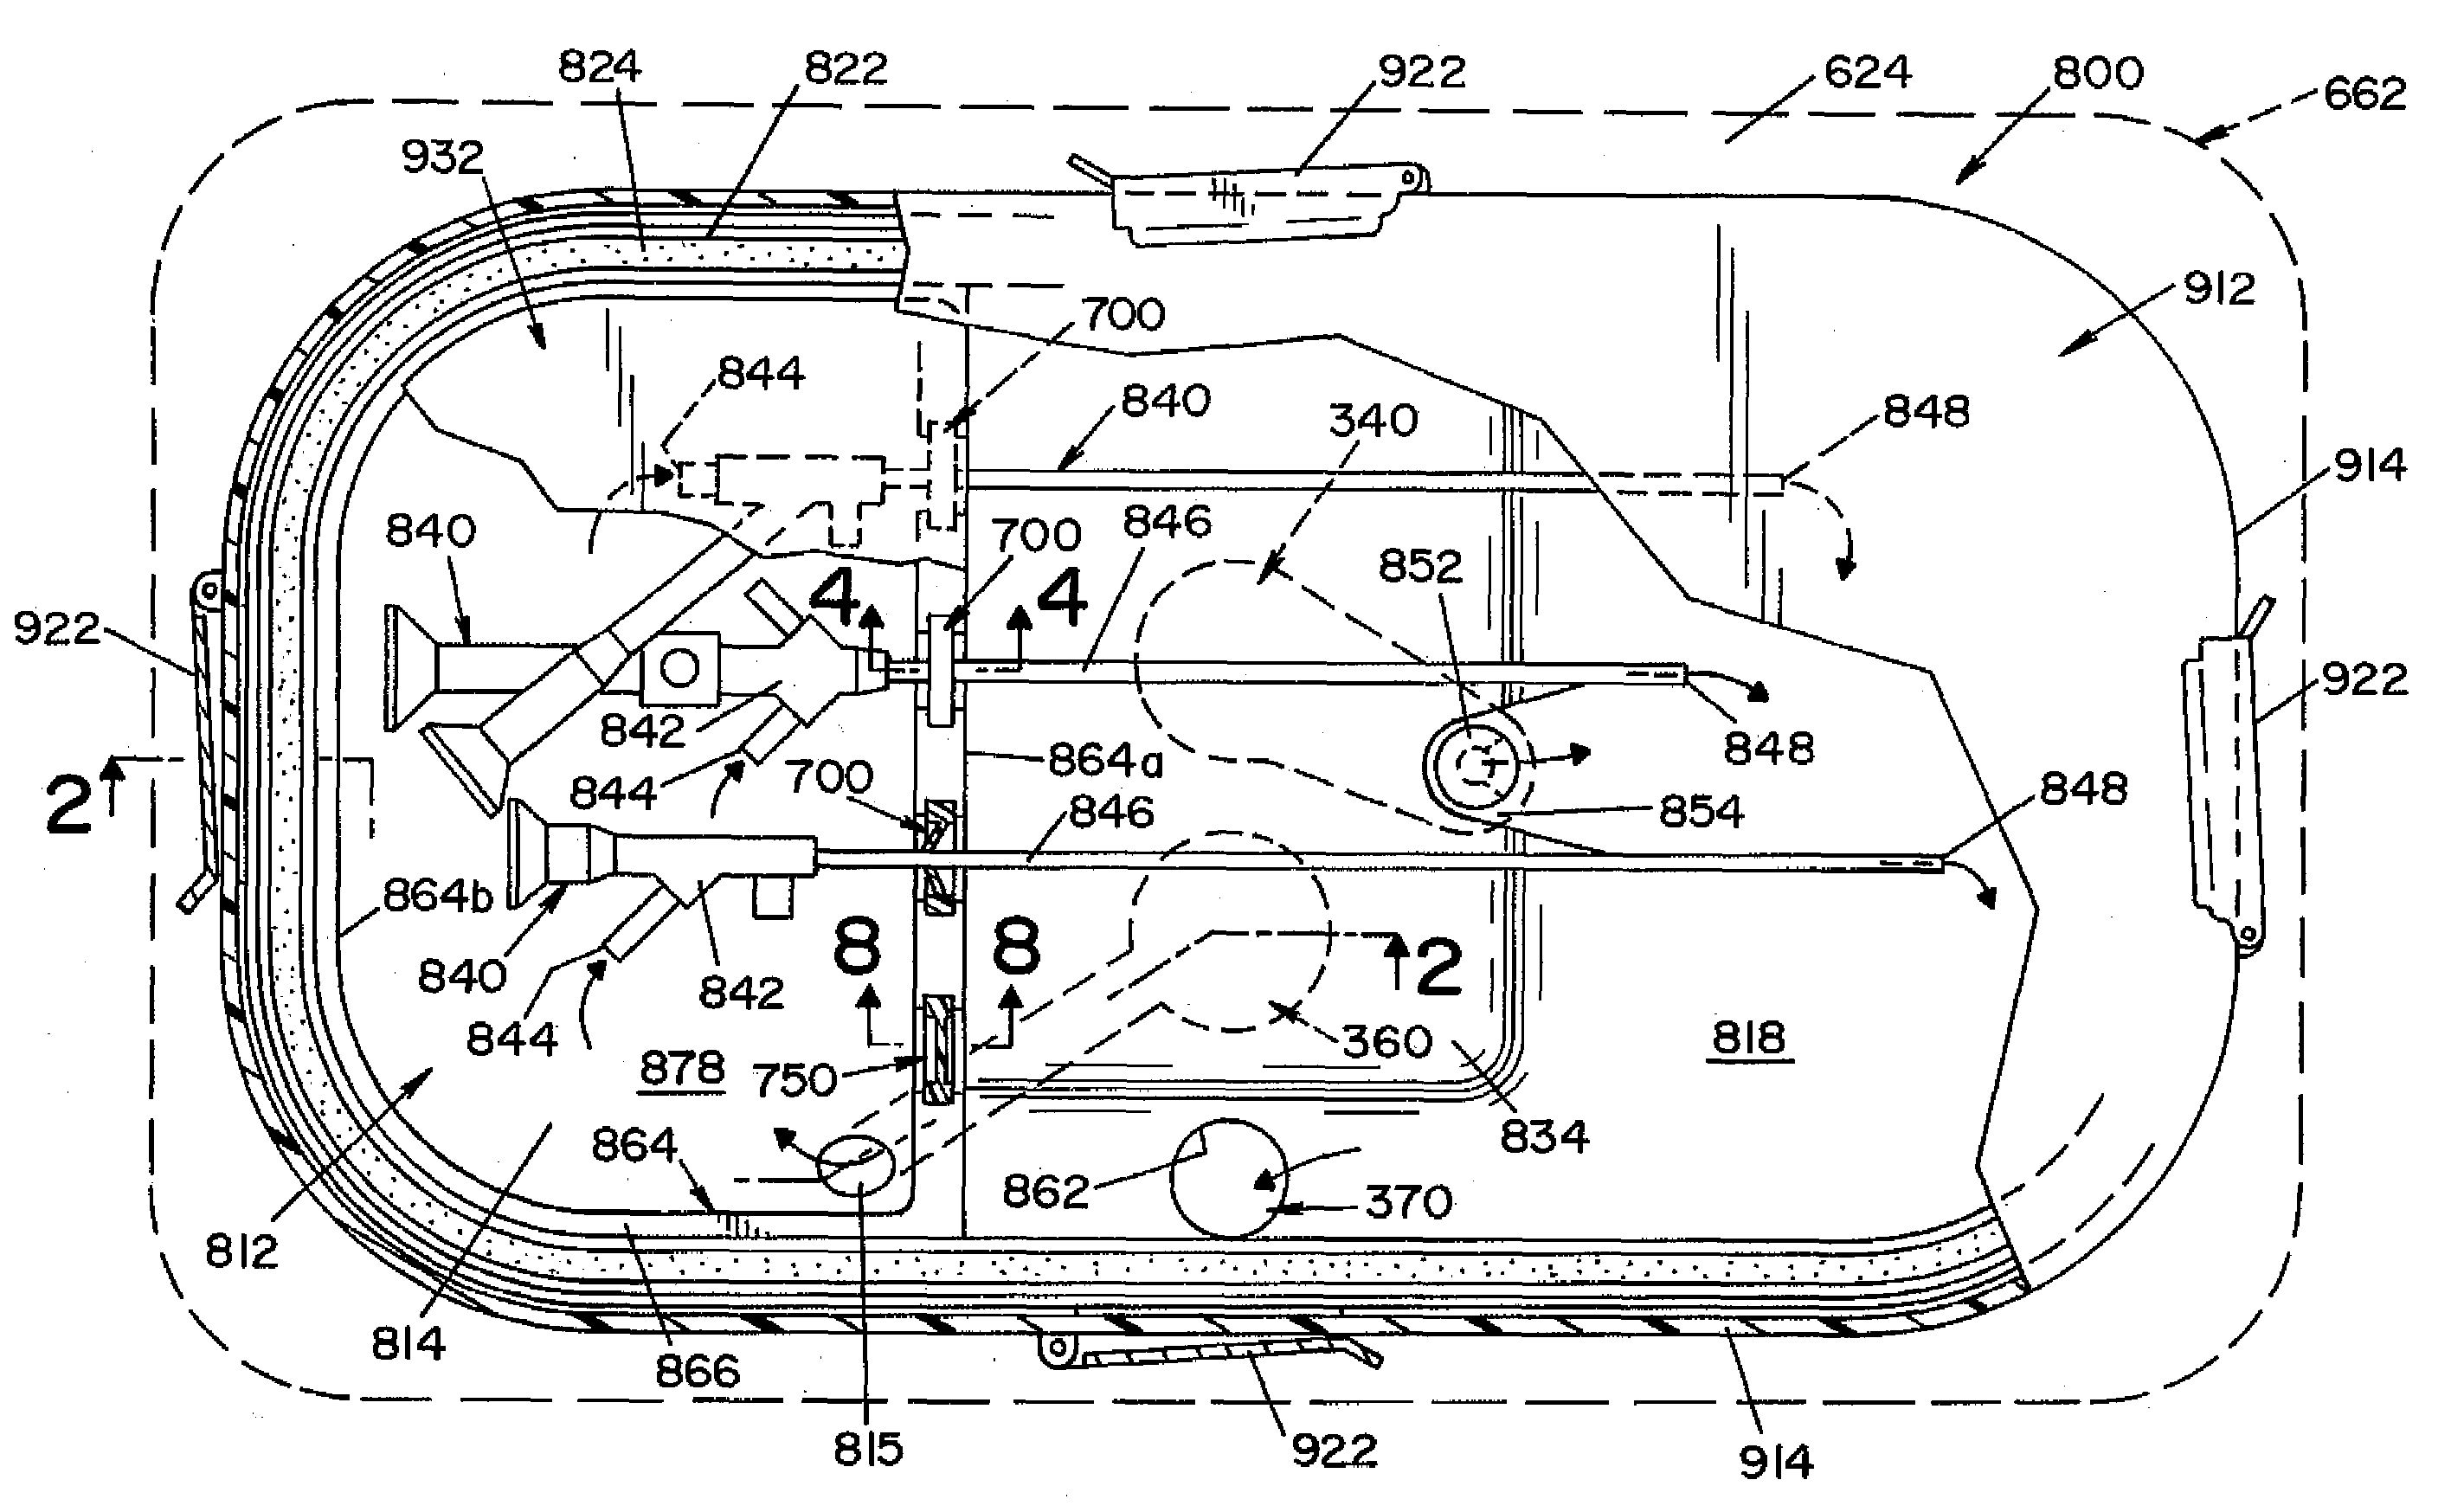 Instrument container having multiple chambers with flow pathways therebetween